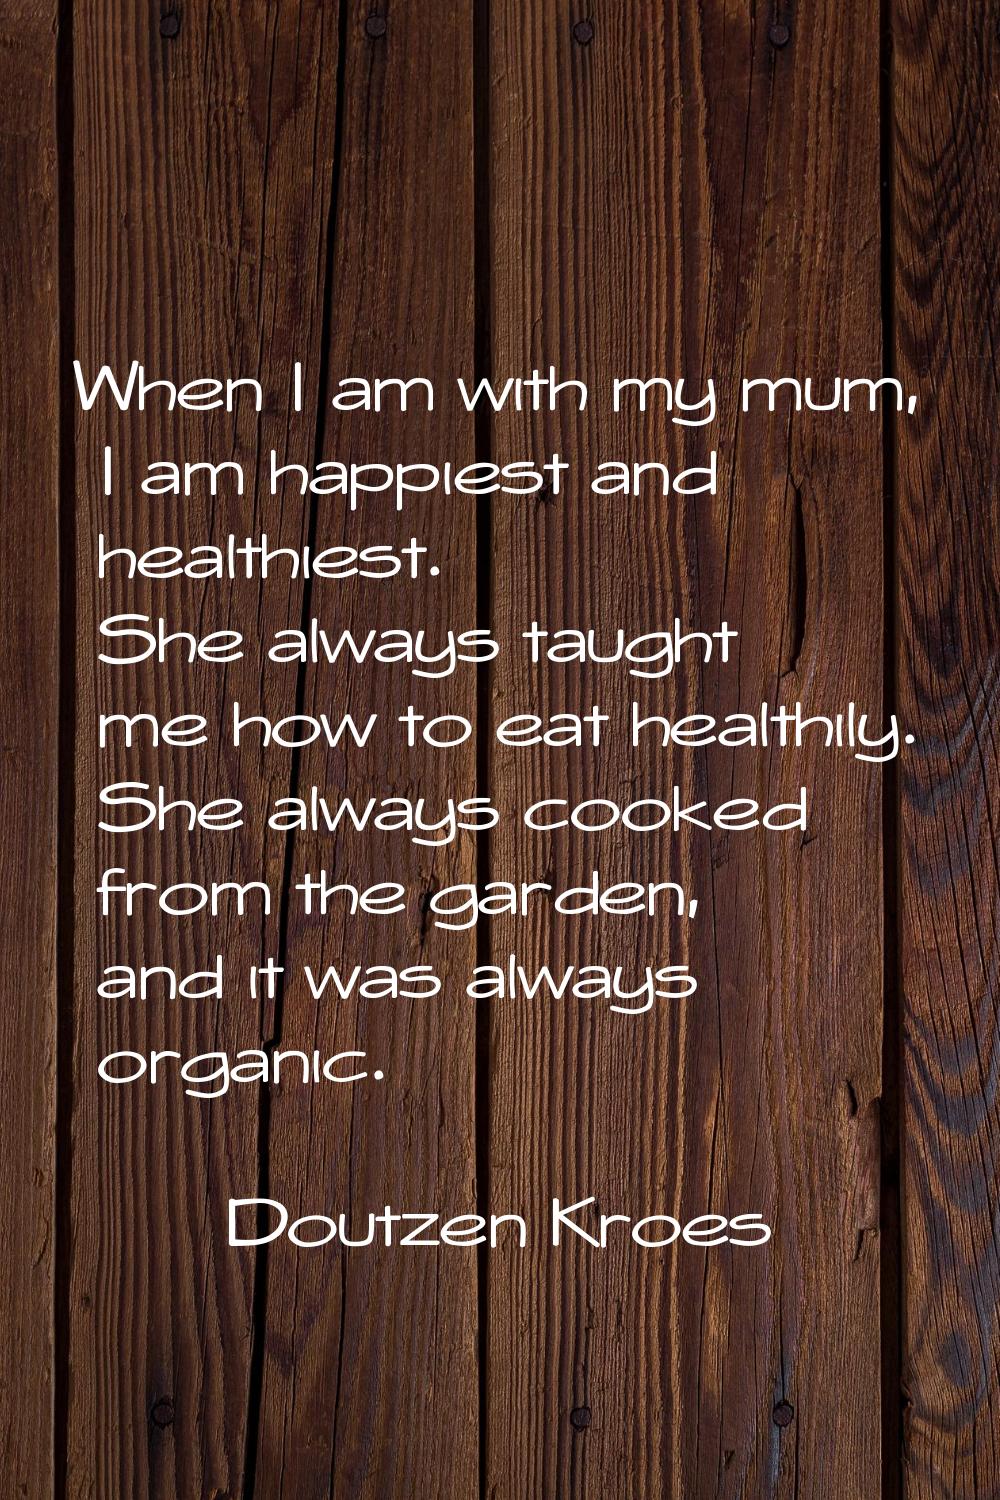 When I am with my mum, I am happiest and healthiest. She always taught me how to eat healthily. She